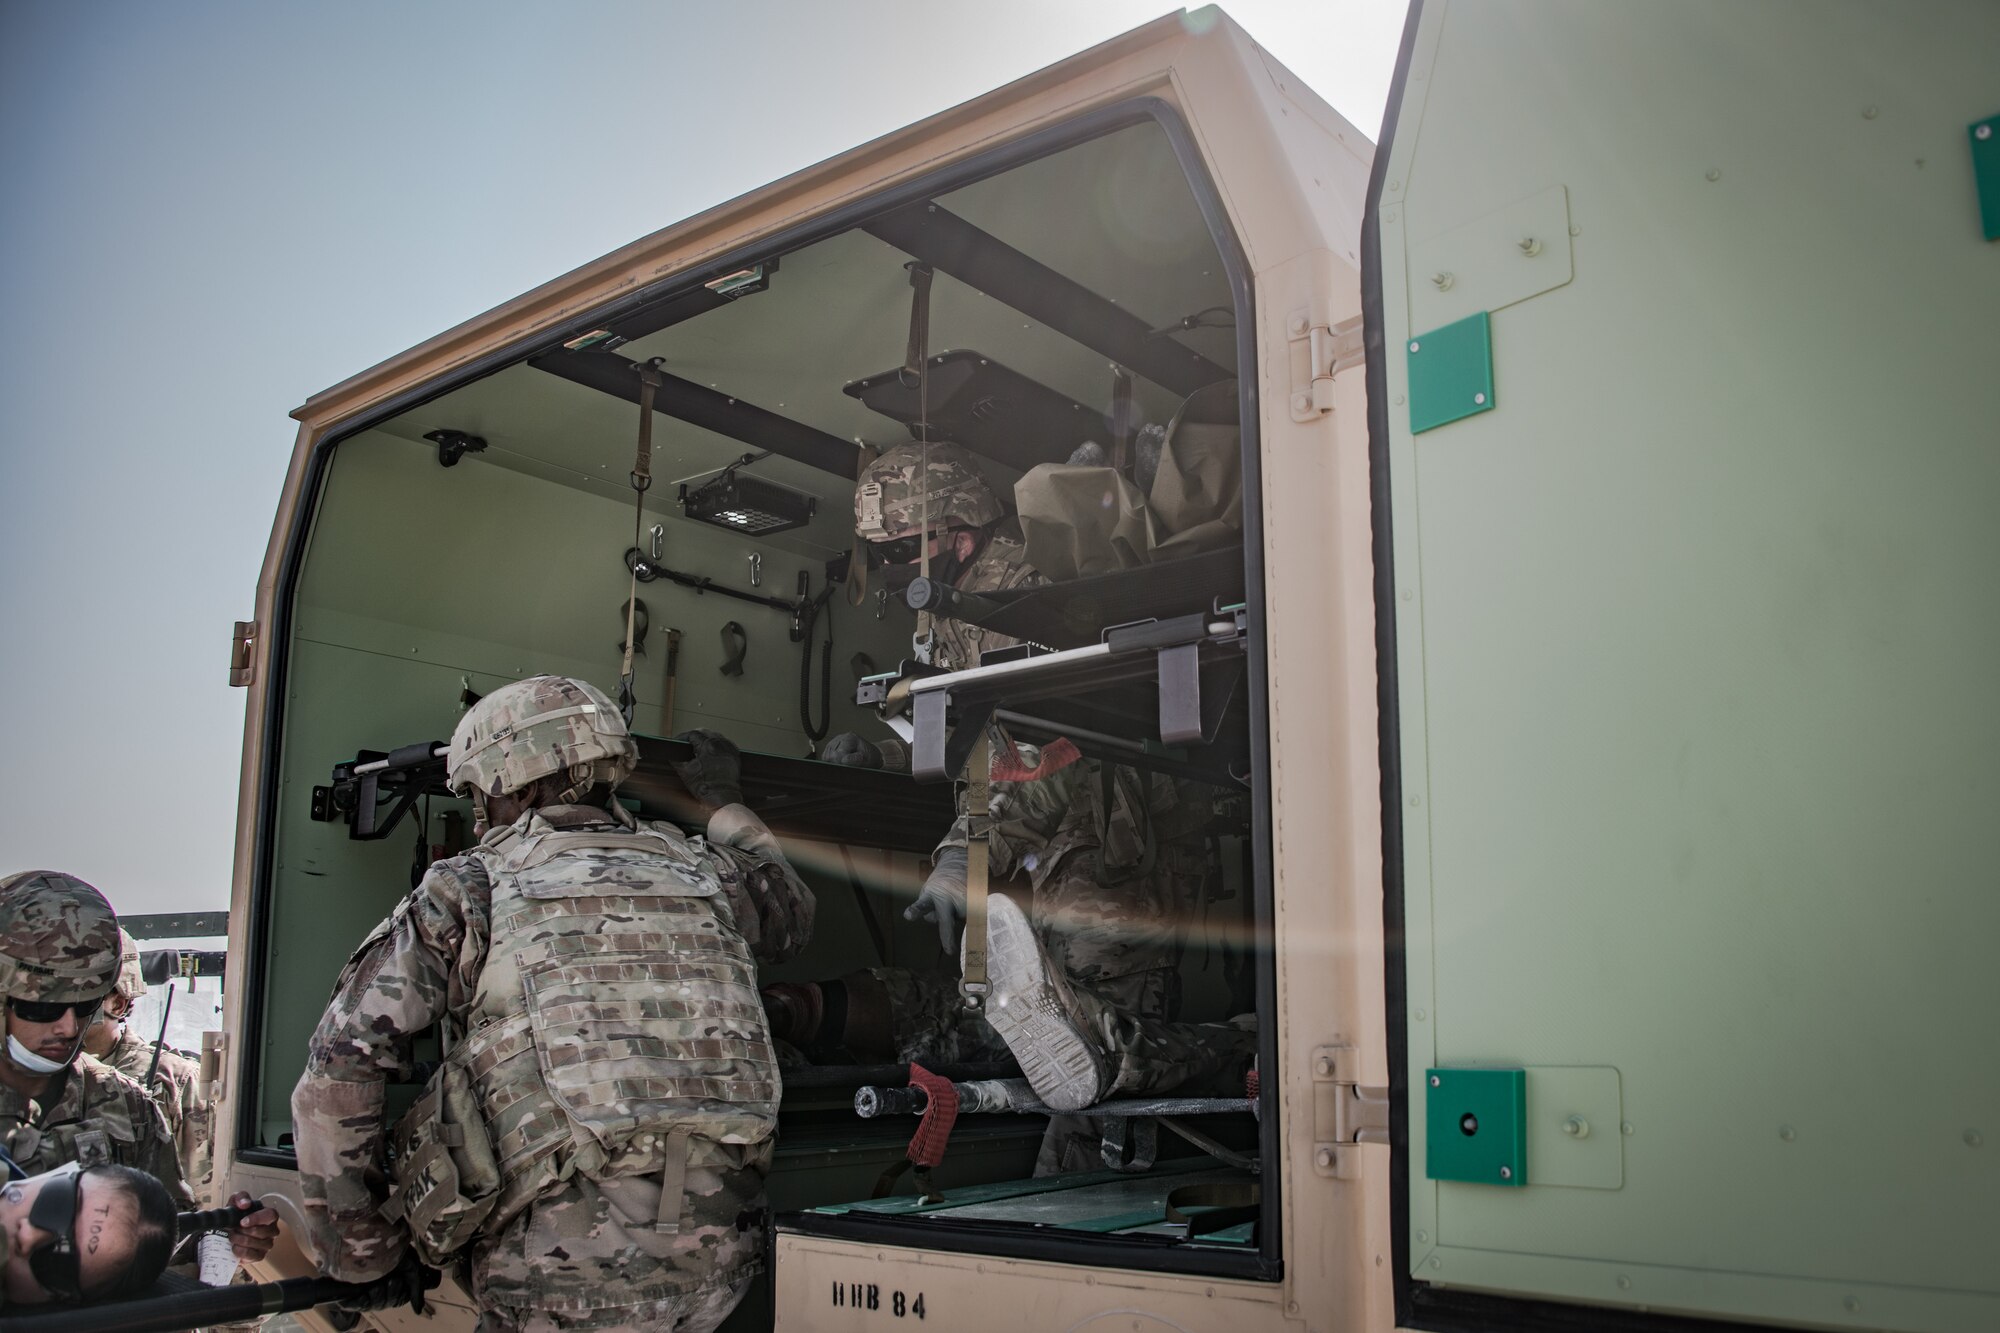 U.S. soldiers lift a litter into an emergency transport vehicle